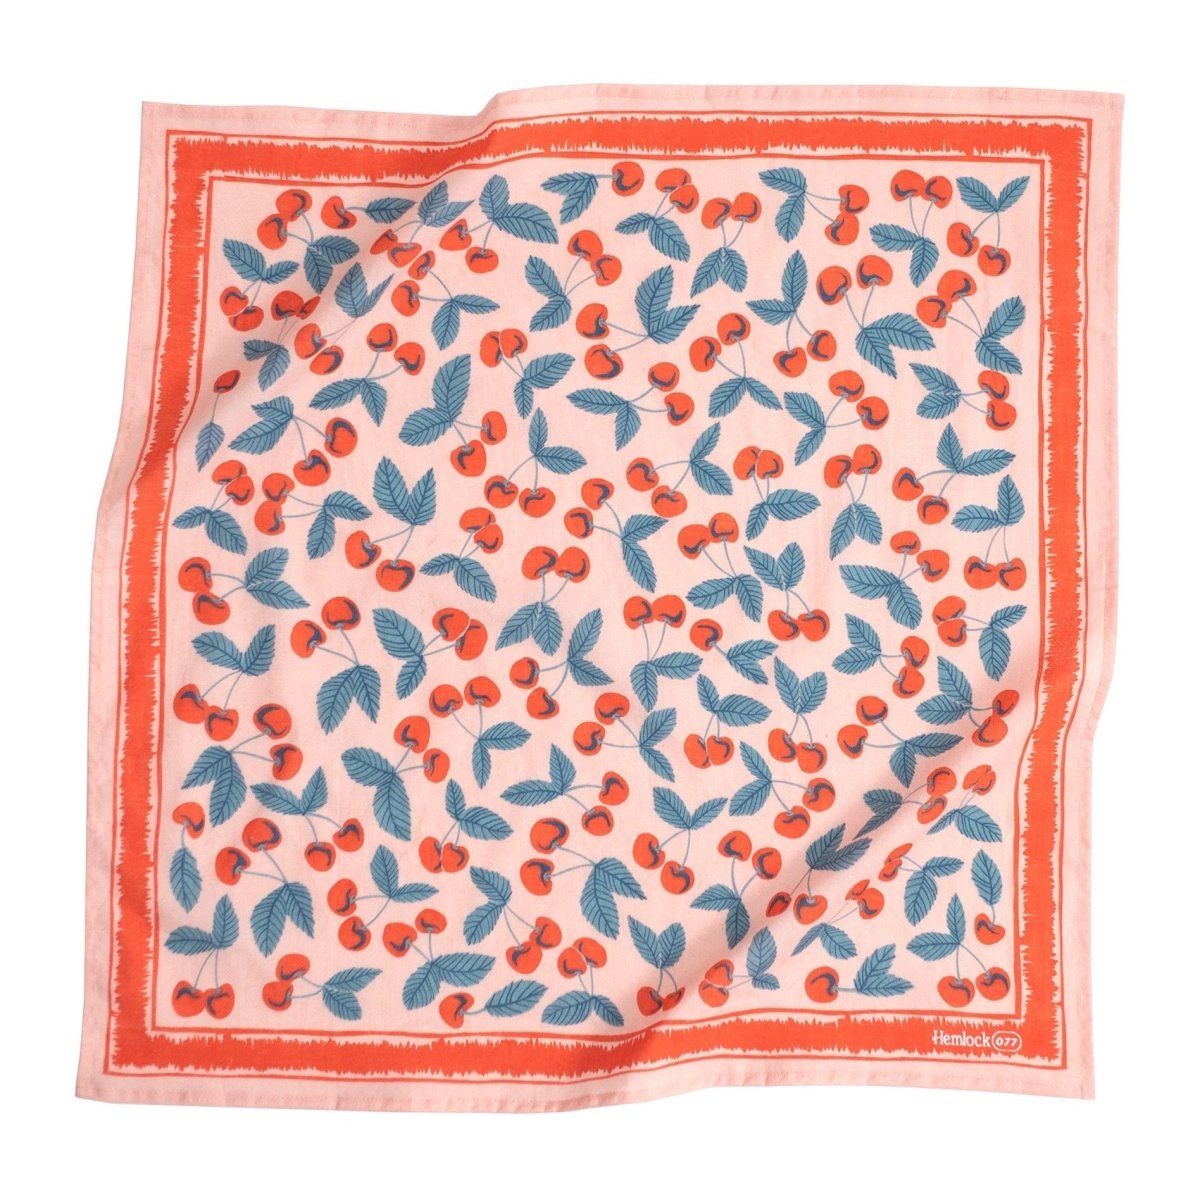 A light pink bandana with bright red and blue cherry illustrations and a solid red border. Designed by Hemlock Goods in Fulton, MO and screen printed by hand in India.